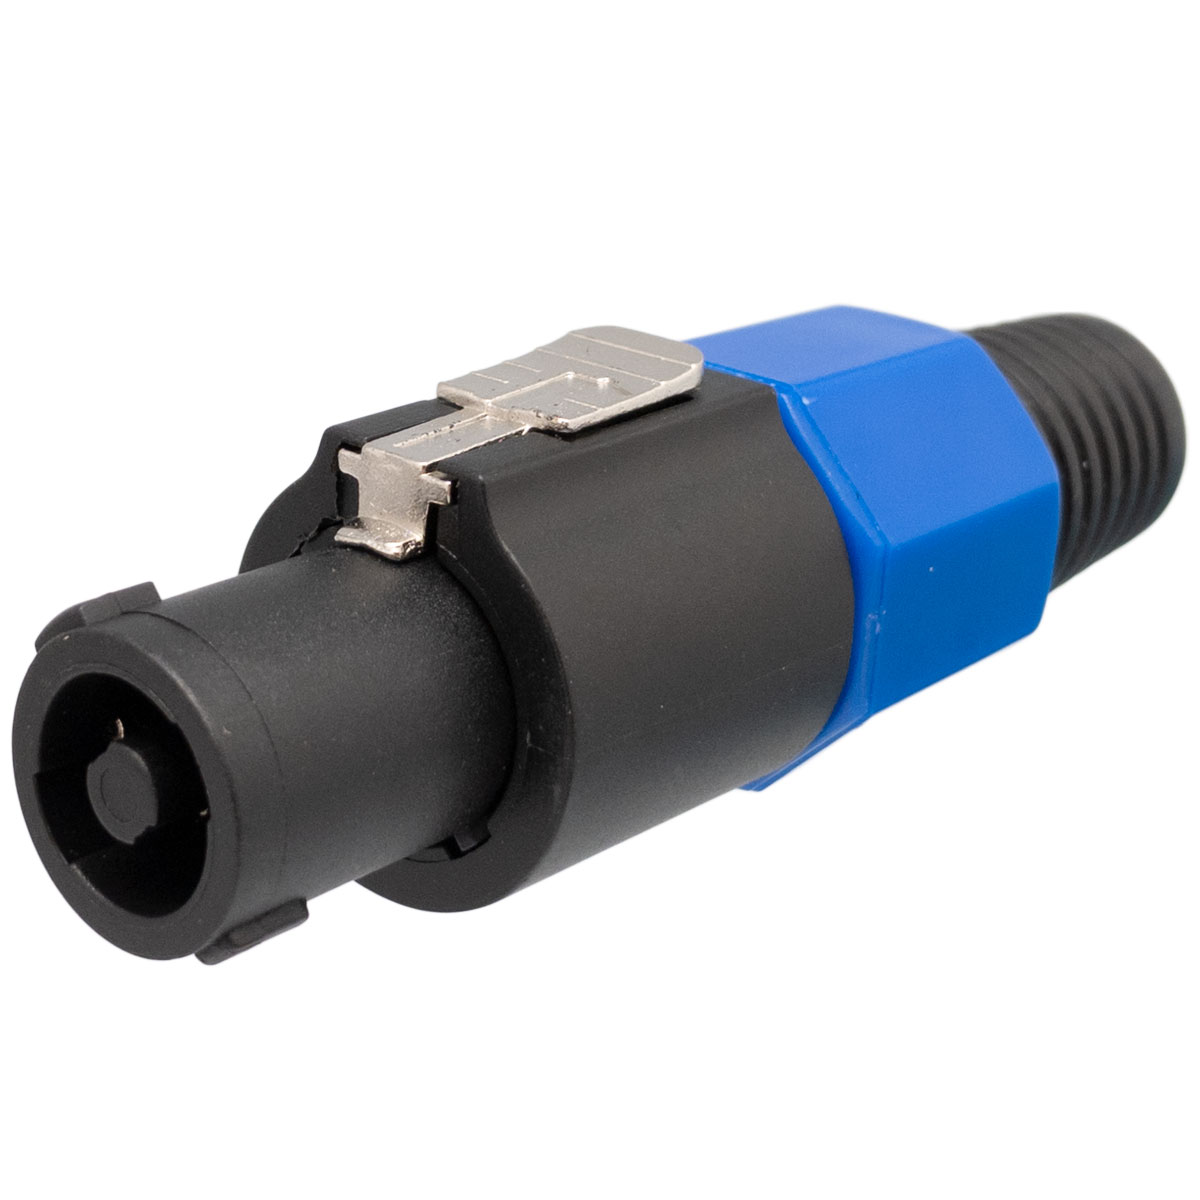 SPEAKON MALE CONNECTOR, 8 CONTACTS